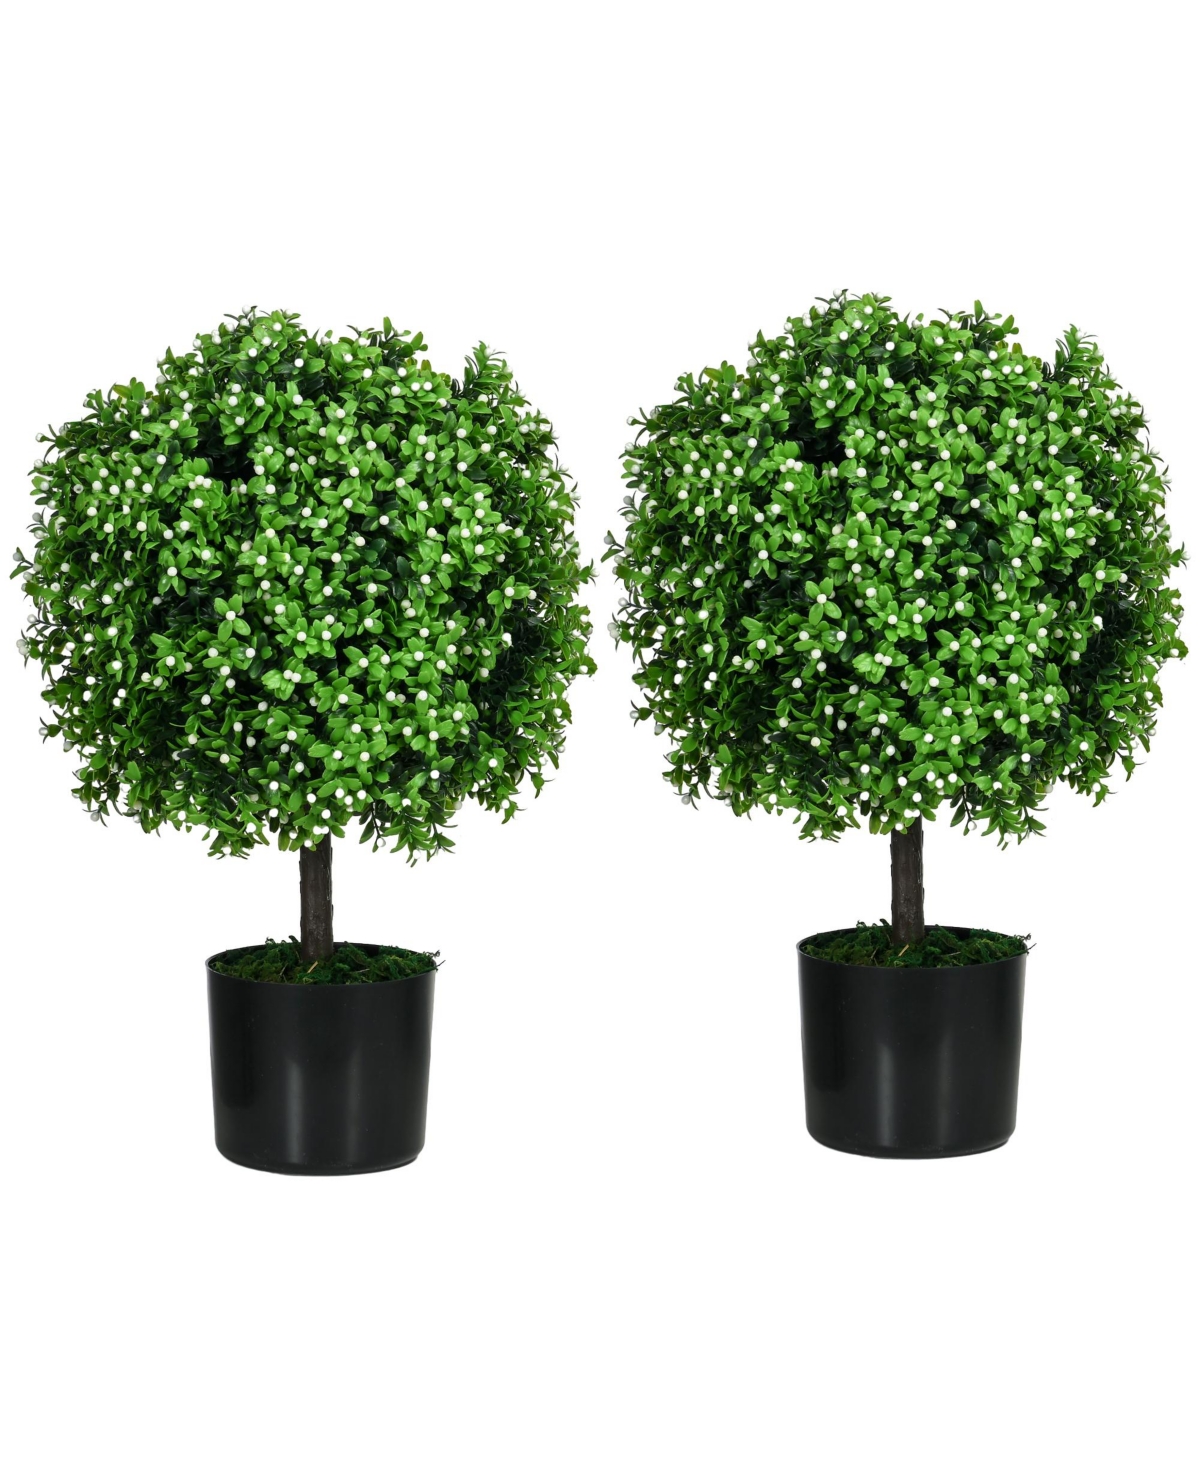 Artificial Tree Boxwood Topiary 2 Pack with Fruit, 20.75", White - Green